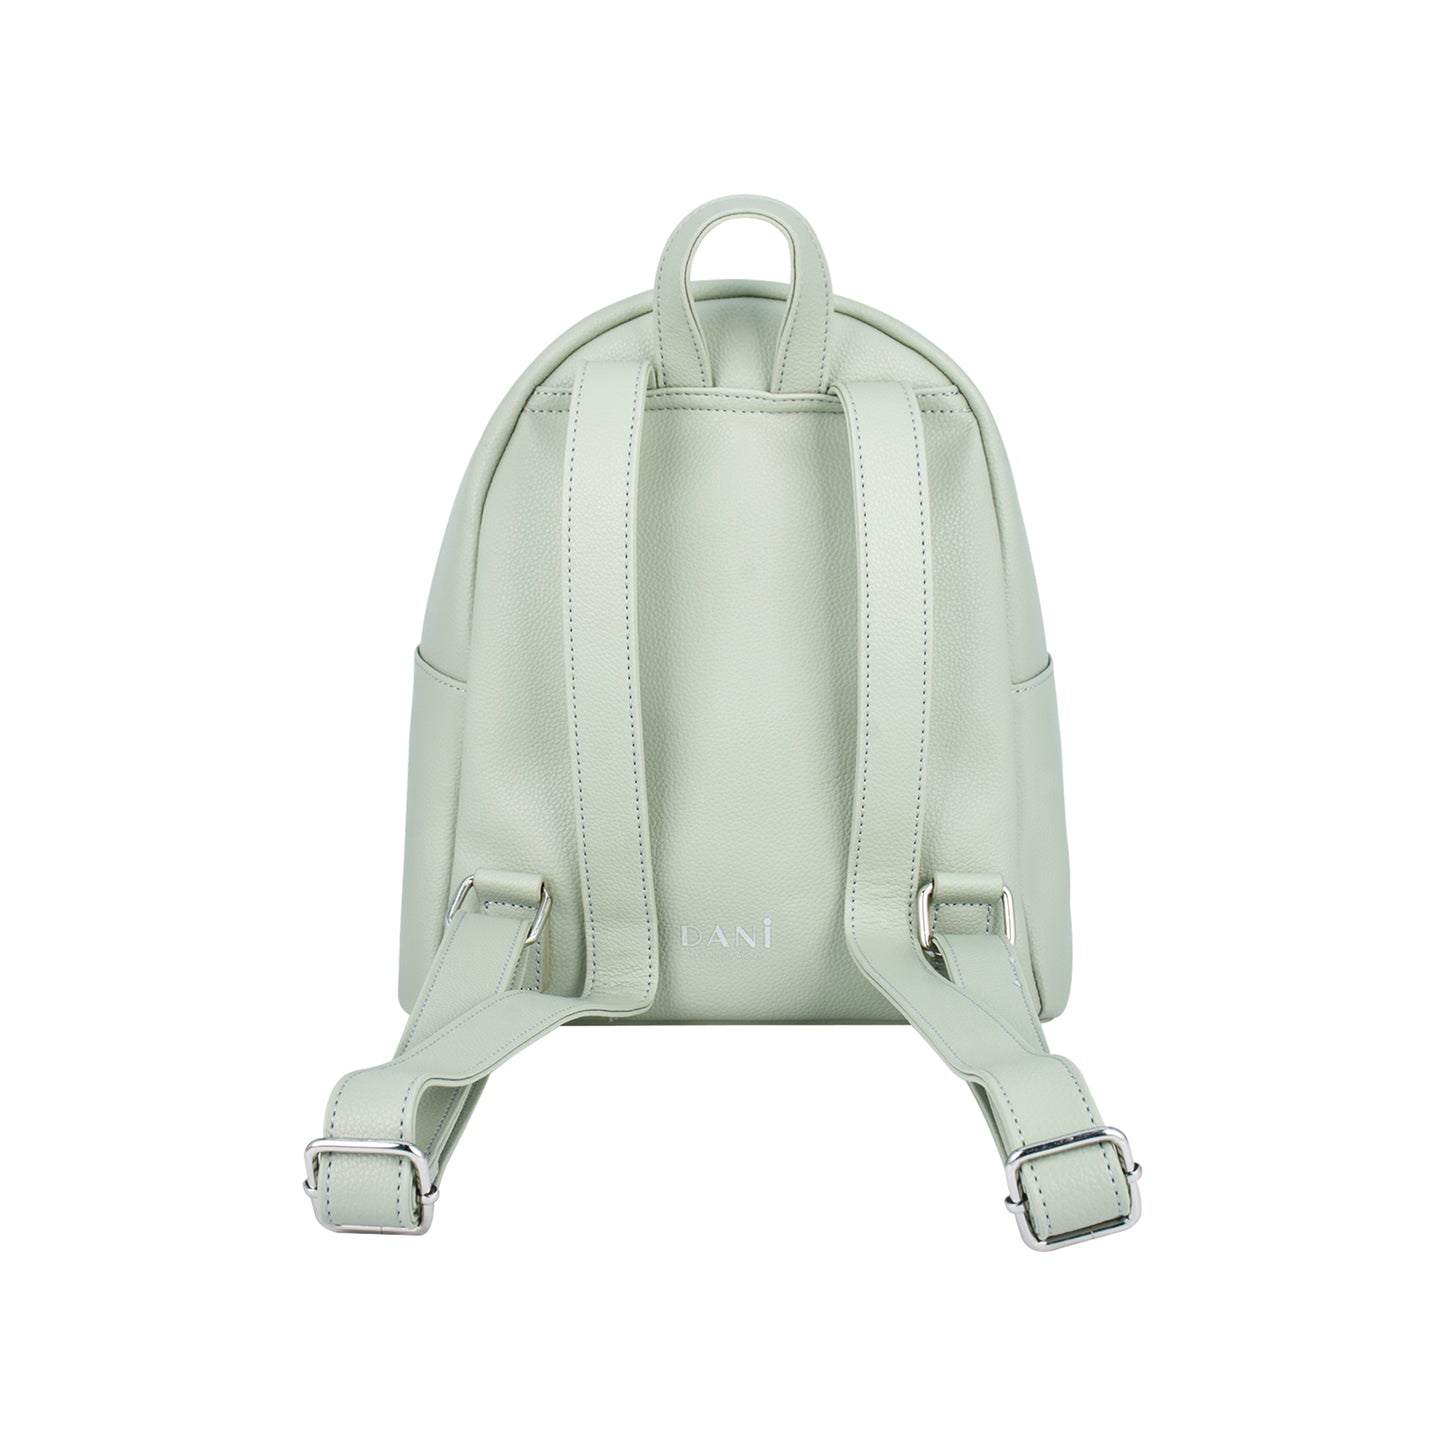 Tom and Jerry Mini Backpack, Small Bookbag, Pale Green, 9 Inch